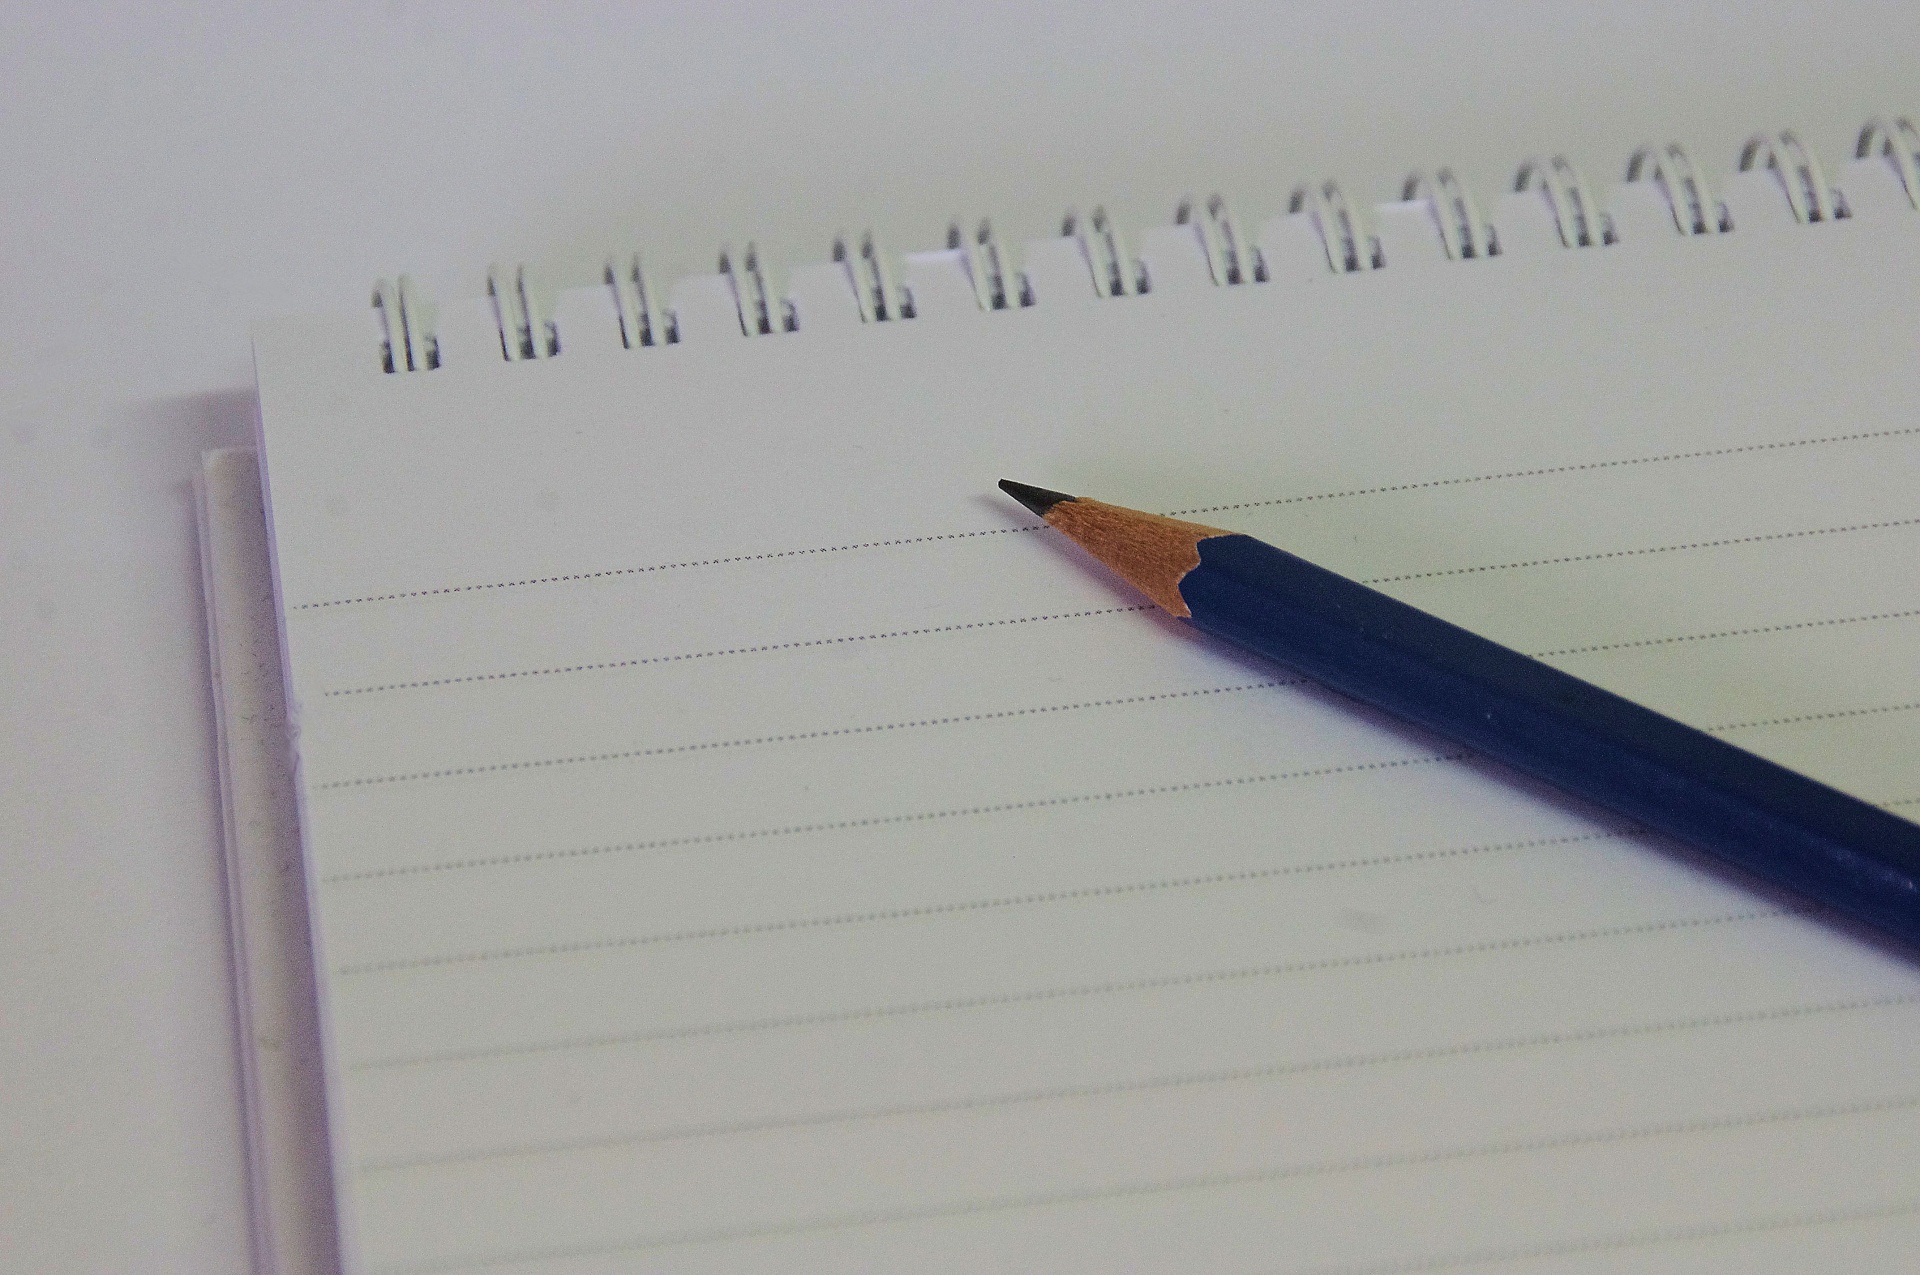 close up photo of a pencil and notebook